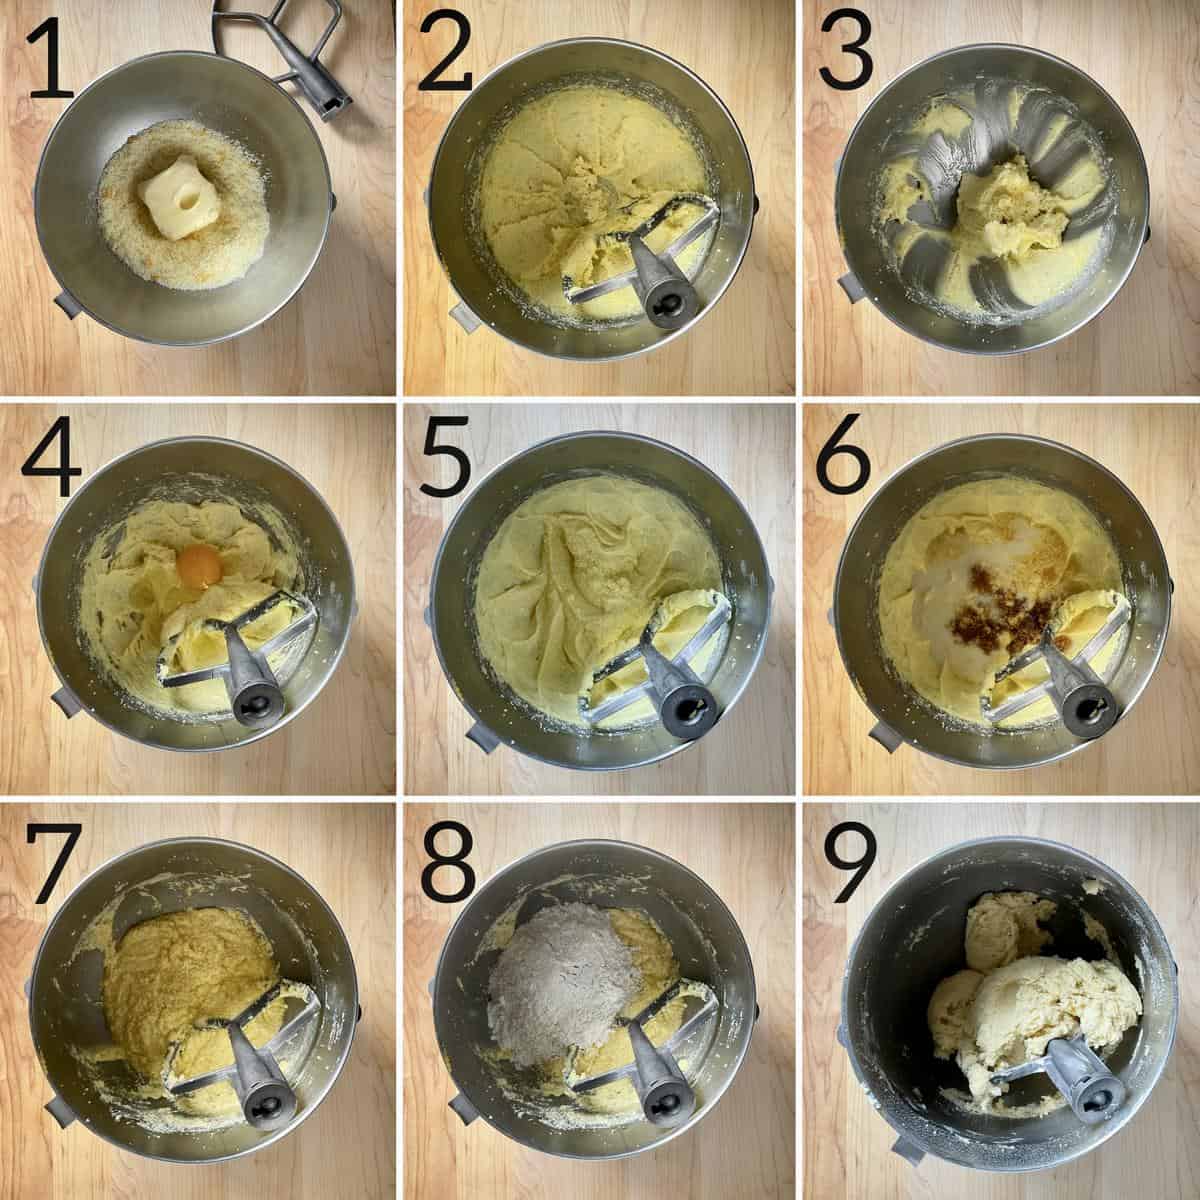 Step by step tutorial demonstrating how to make the dough for koulourakia.